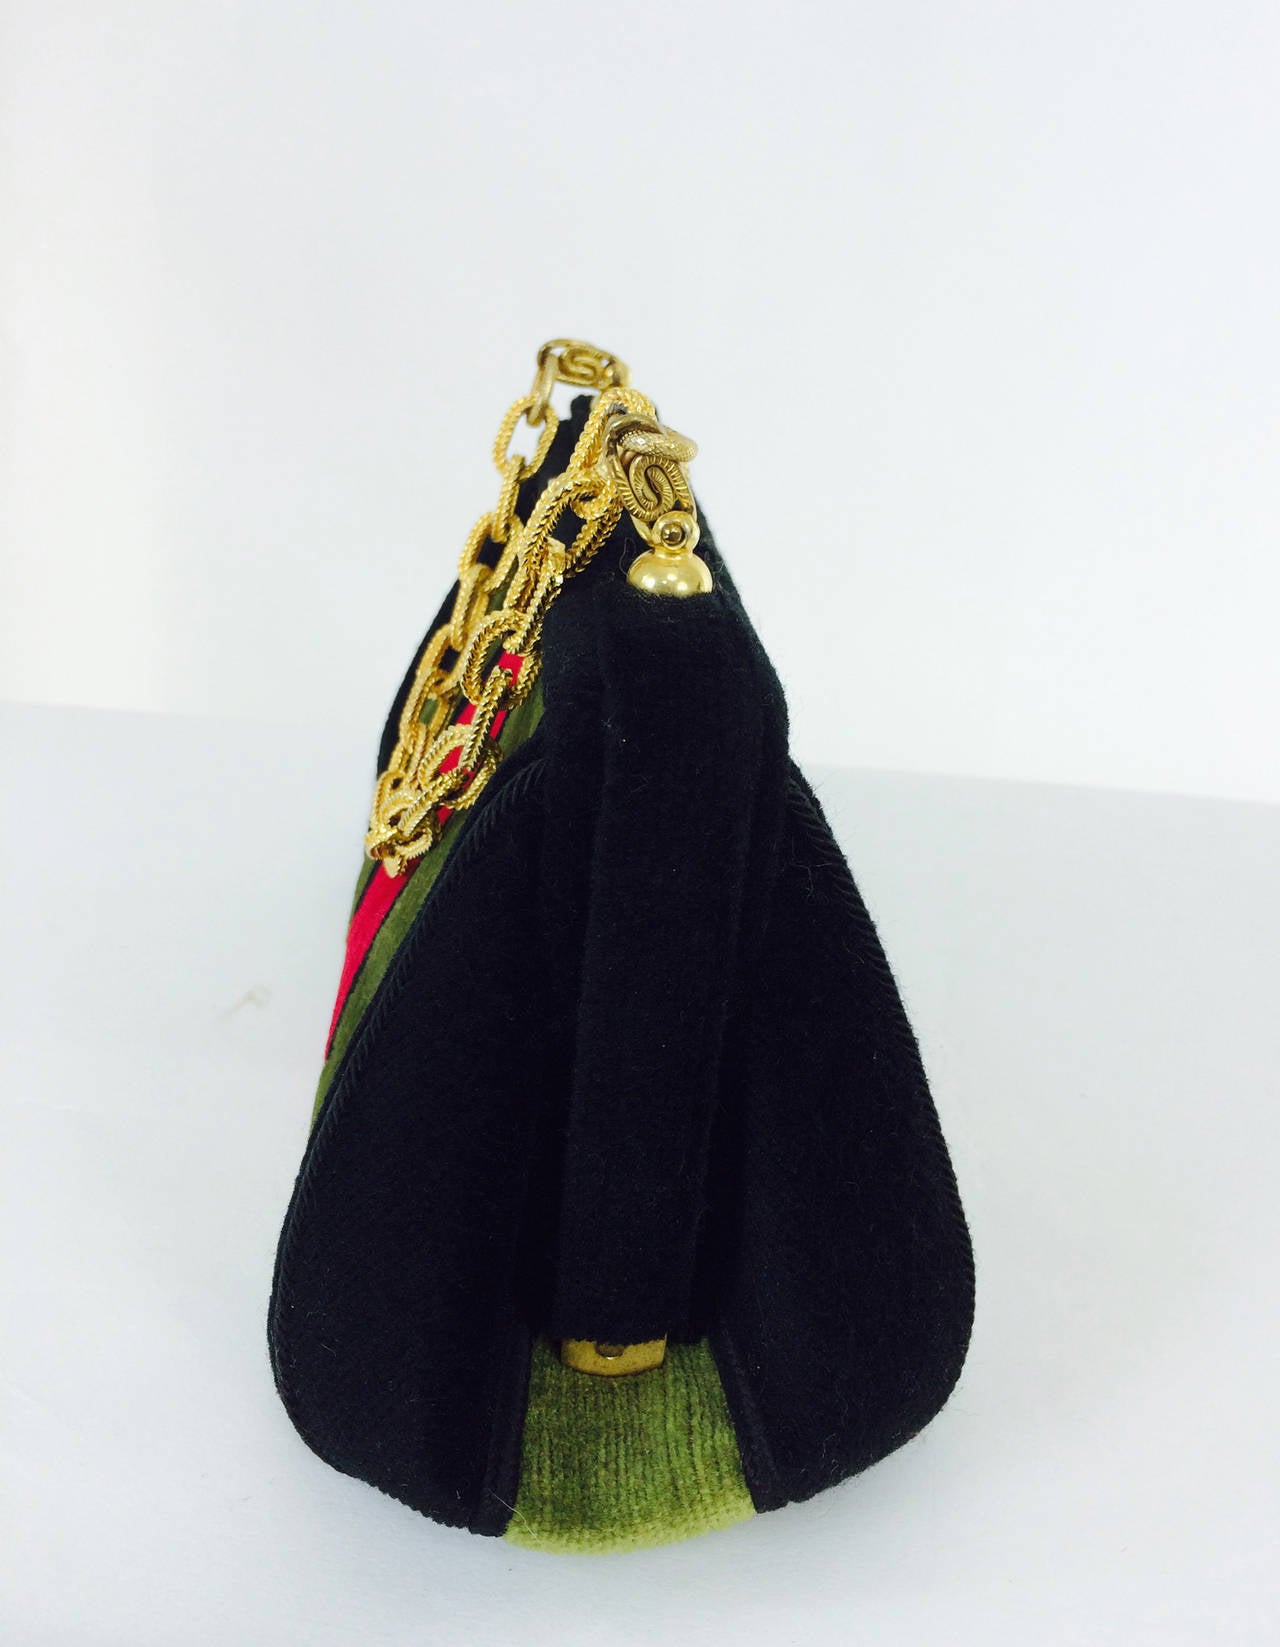 Velvet chain handle bag in red, black & green 1970s...Purchased in Italy in the 1970s, in the manner of Roberta di Camerino...Black, pea green and red velvet frame bag has a gold plated chain handle and decorative snap closure...The interior is